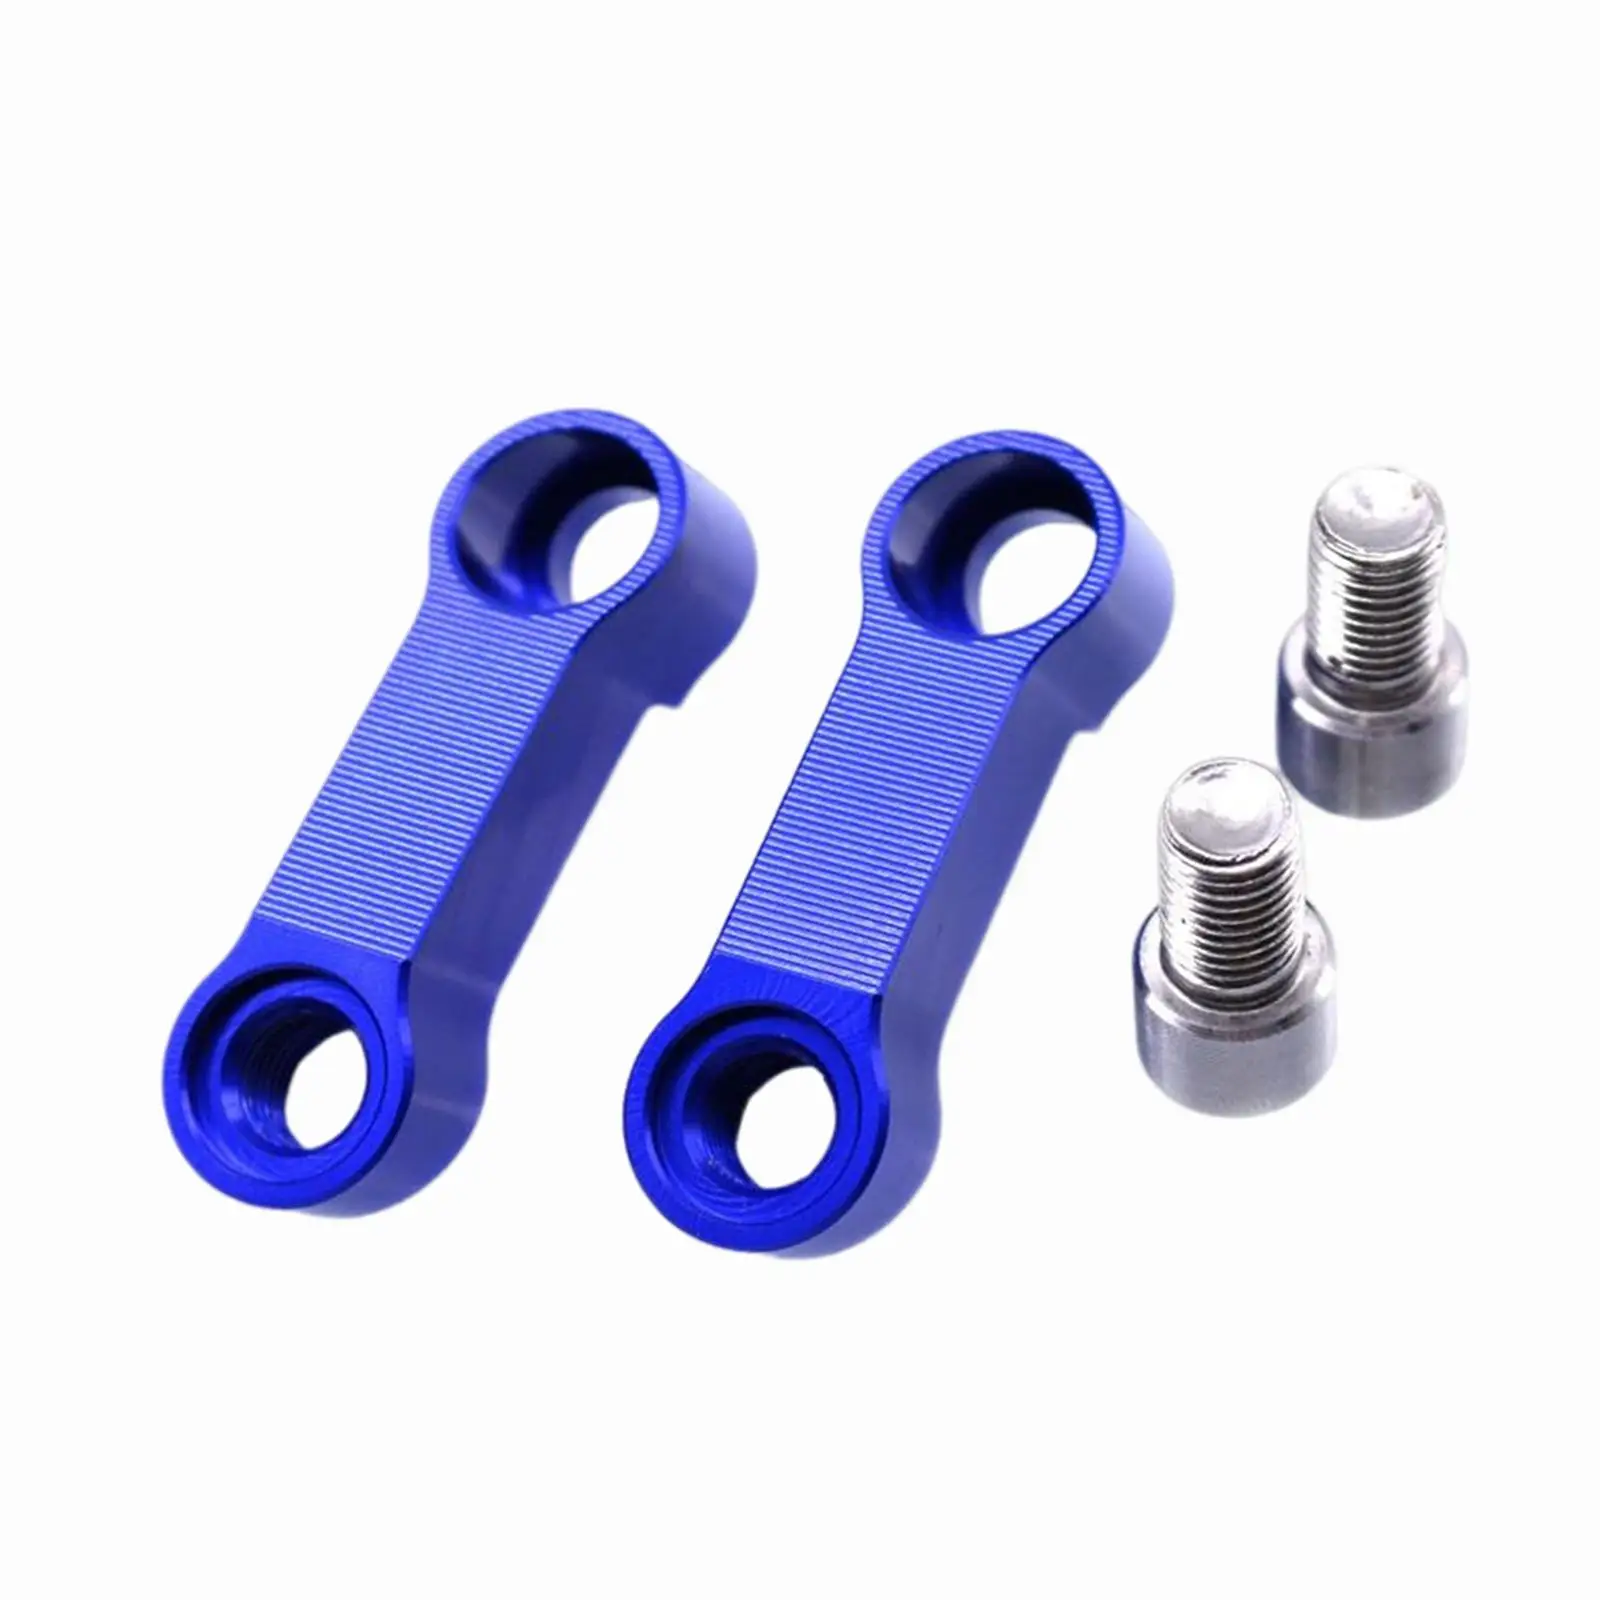 2, 10mm  Alloy  Adapter Kit Professional Accessories M10   Adapter